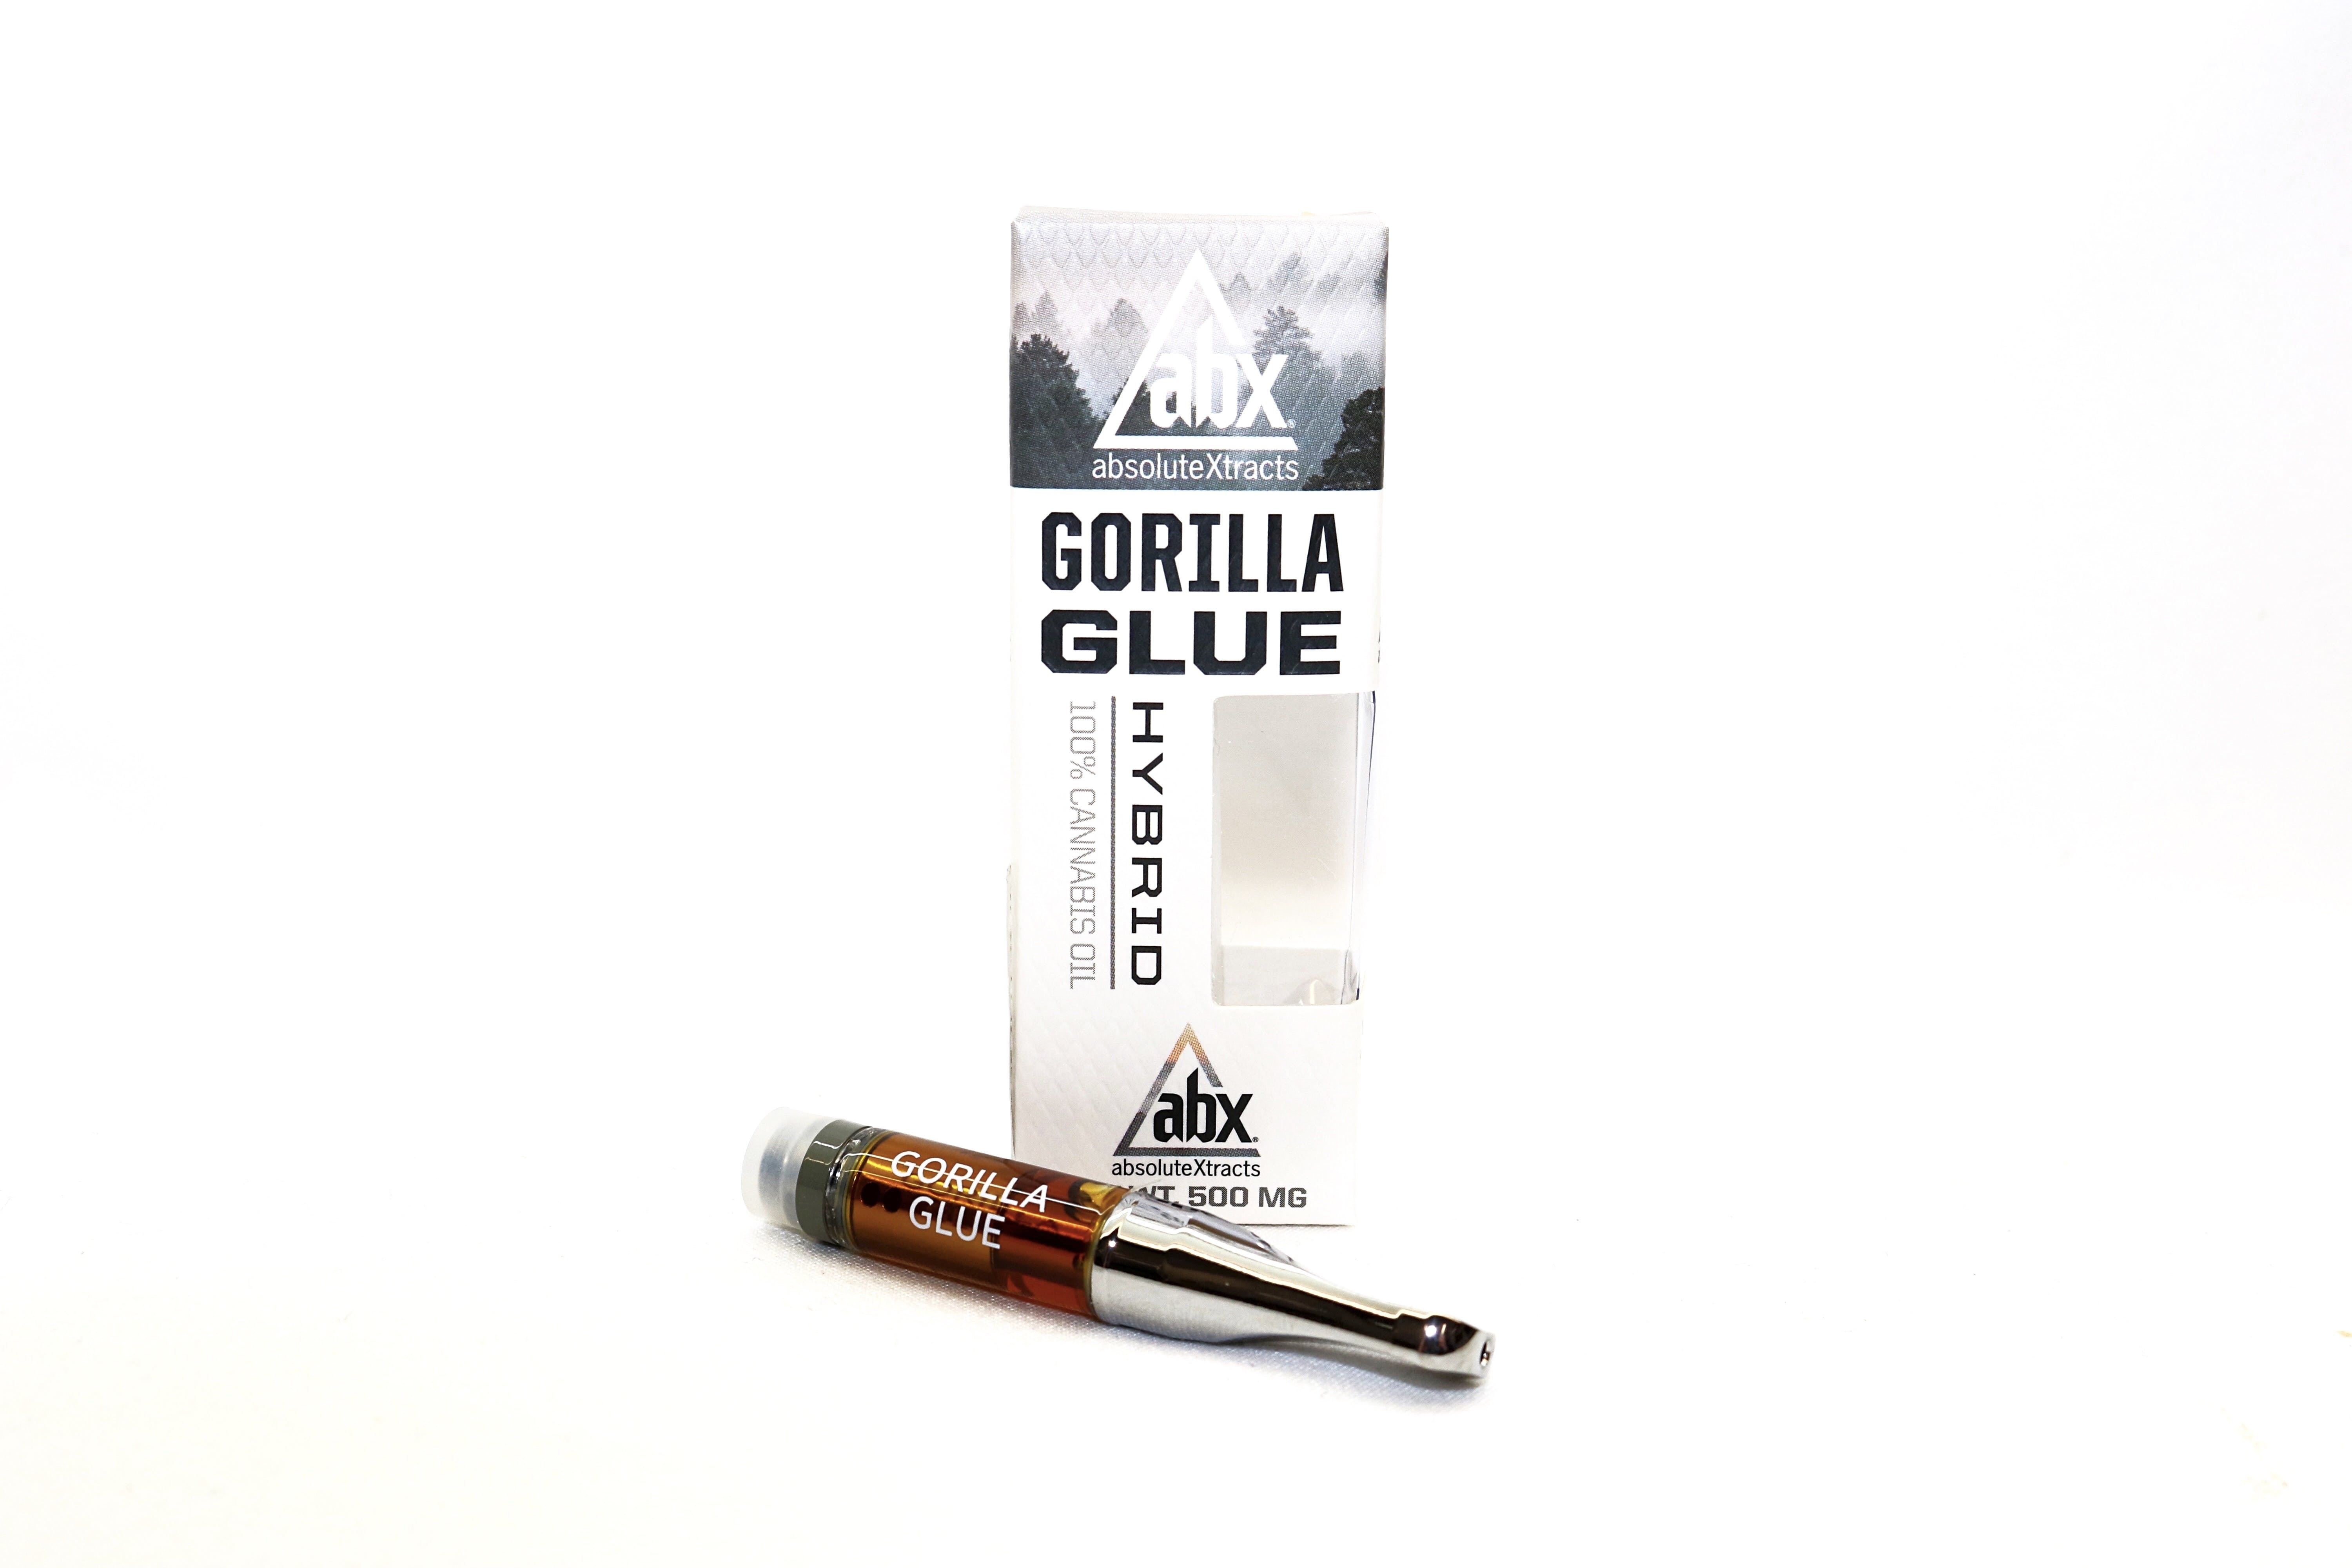 concentrate-absolutextracts-abx-gorilla-glue-vape-cartridge-500mg